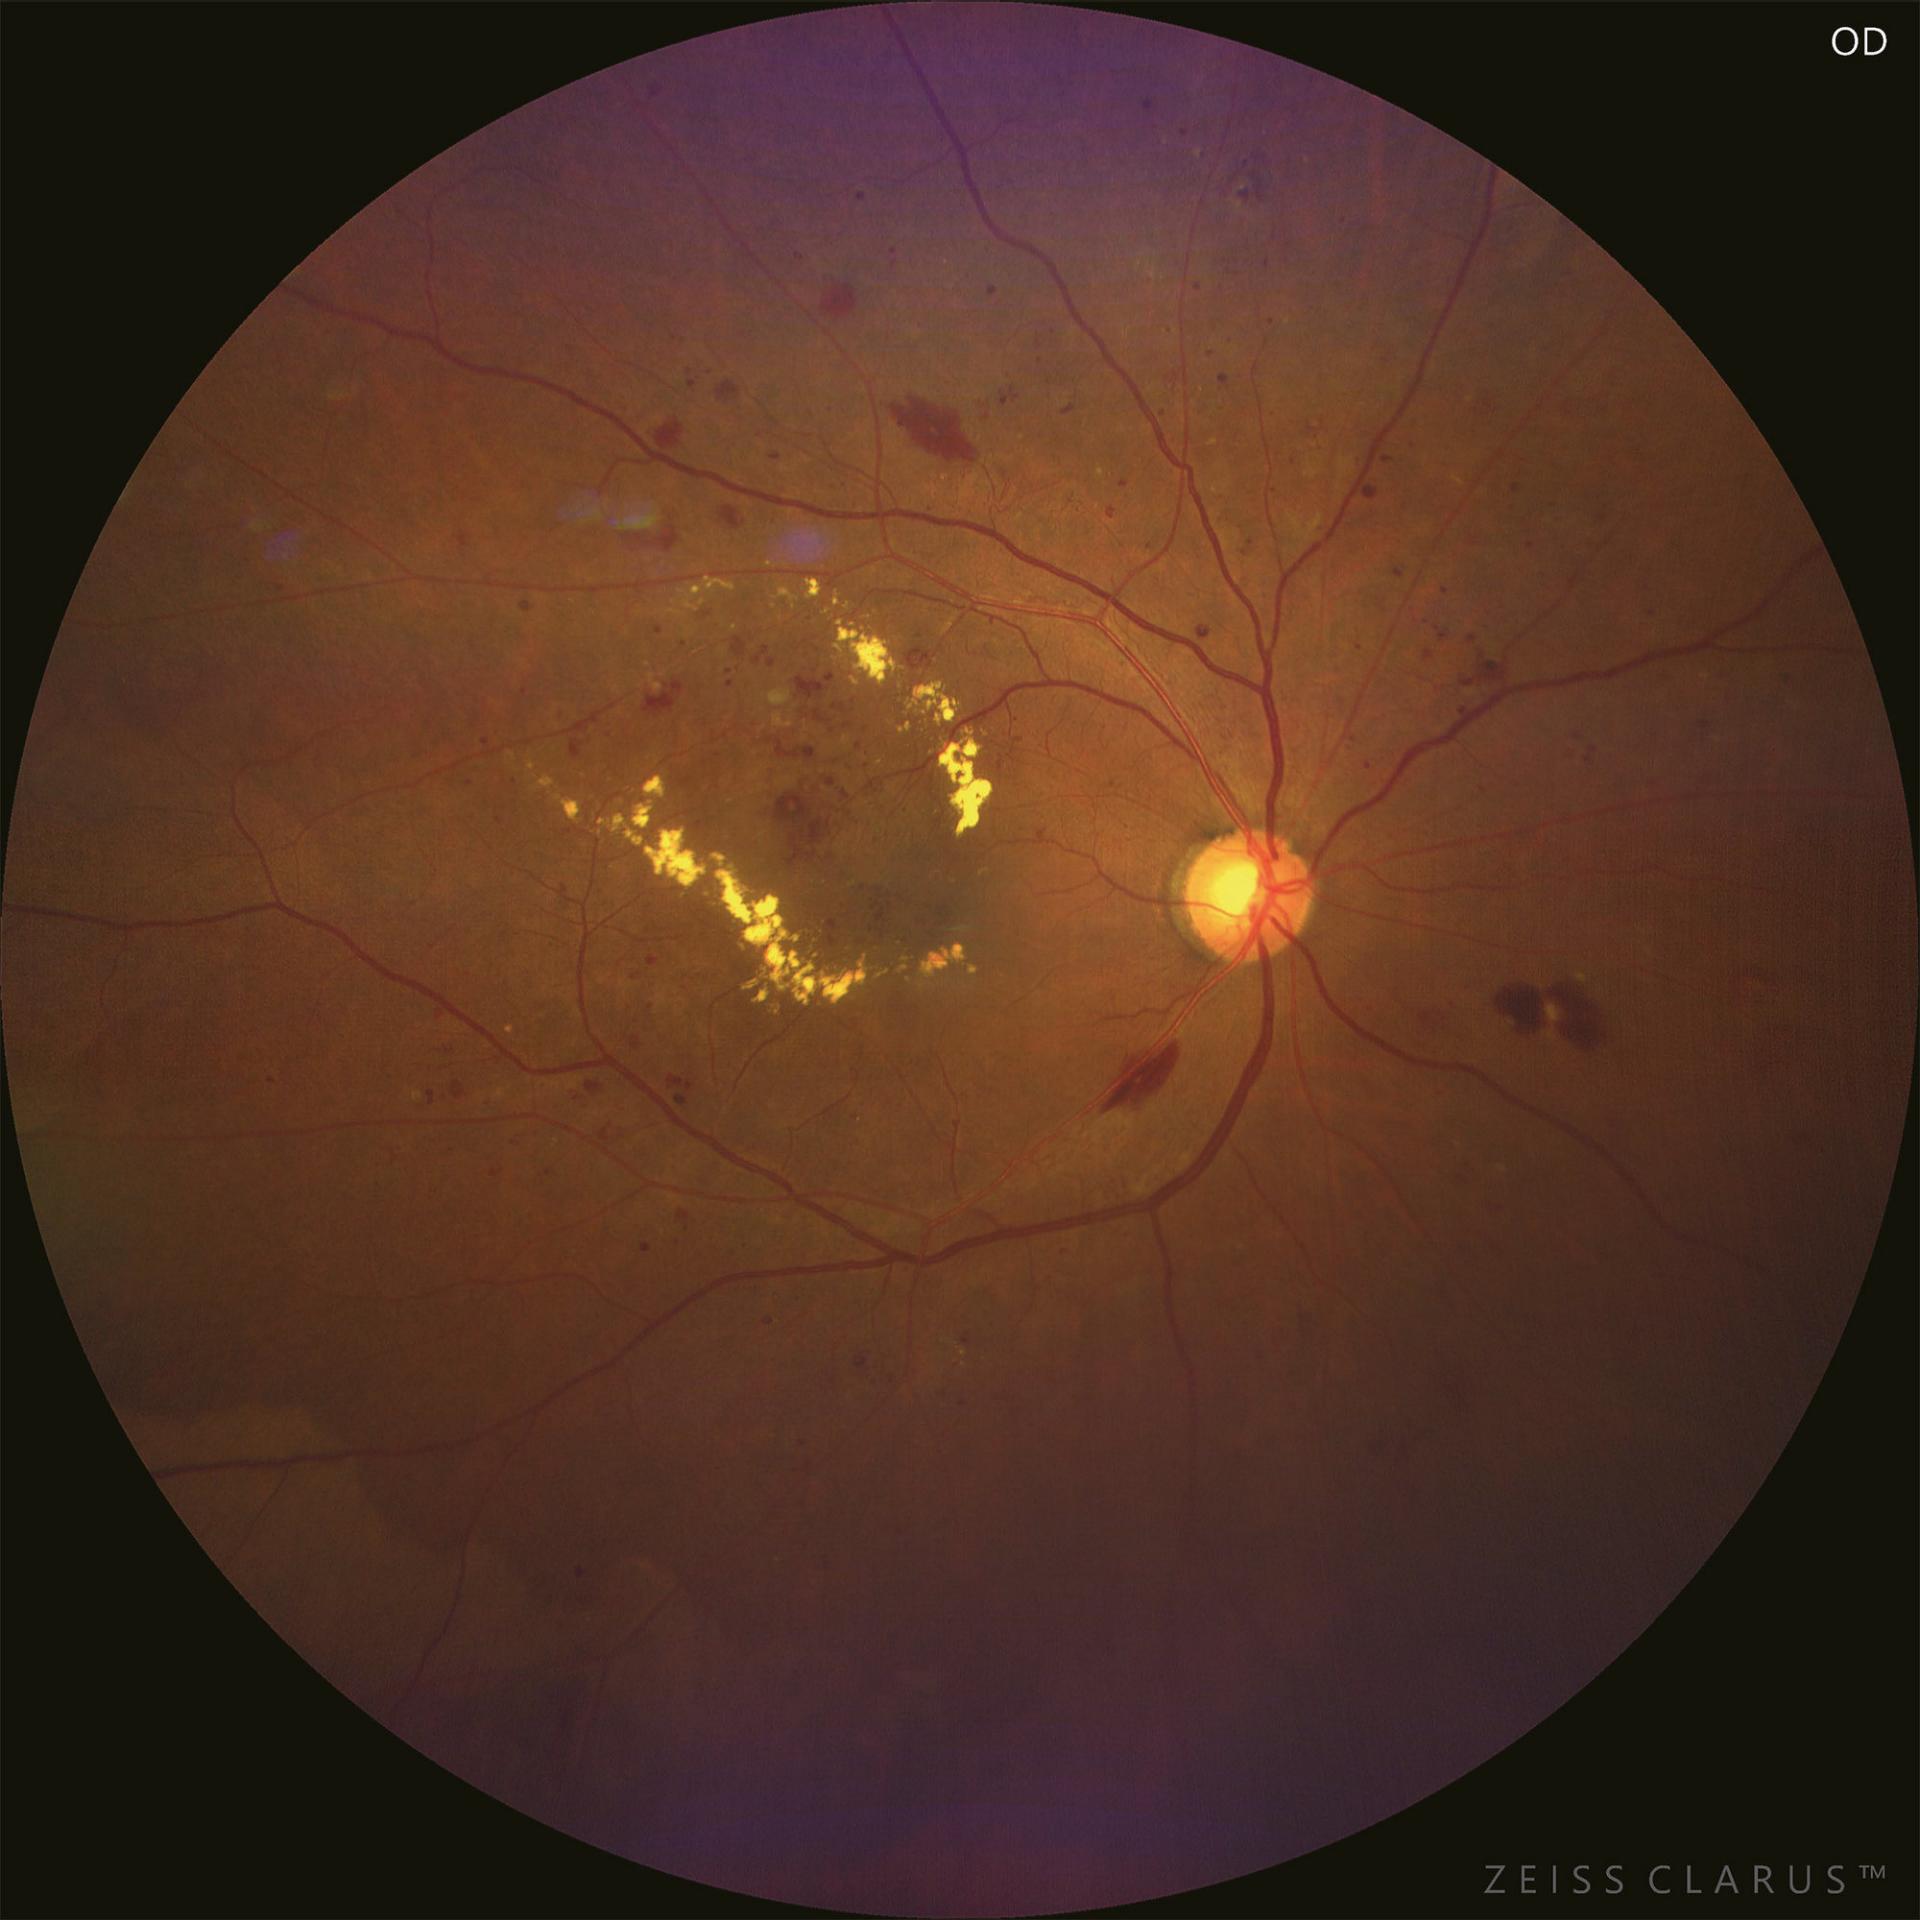 Magnified image of the macula